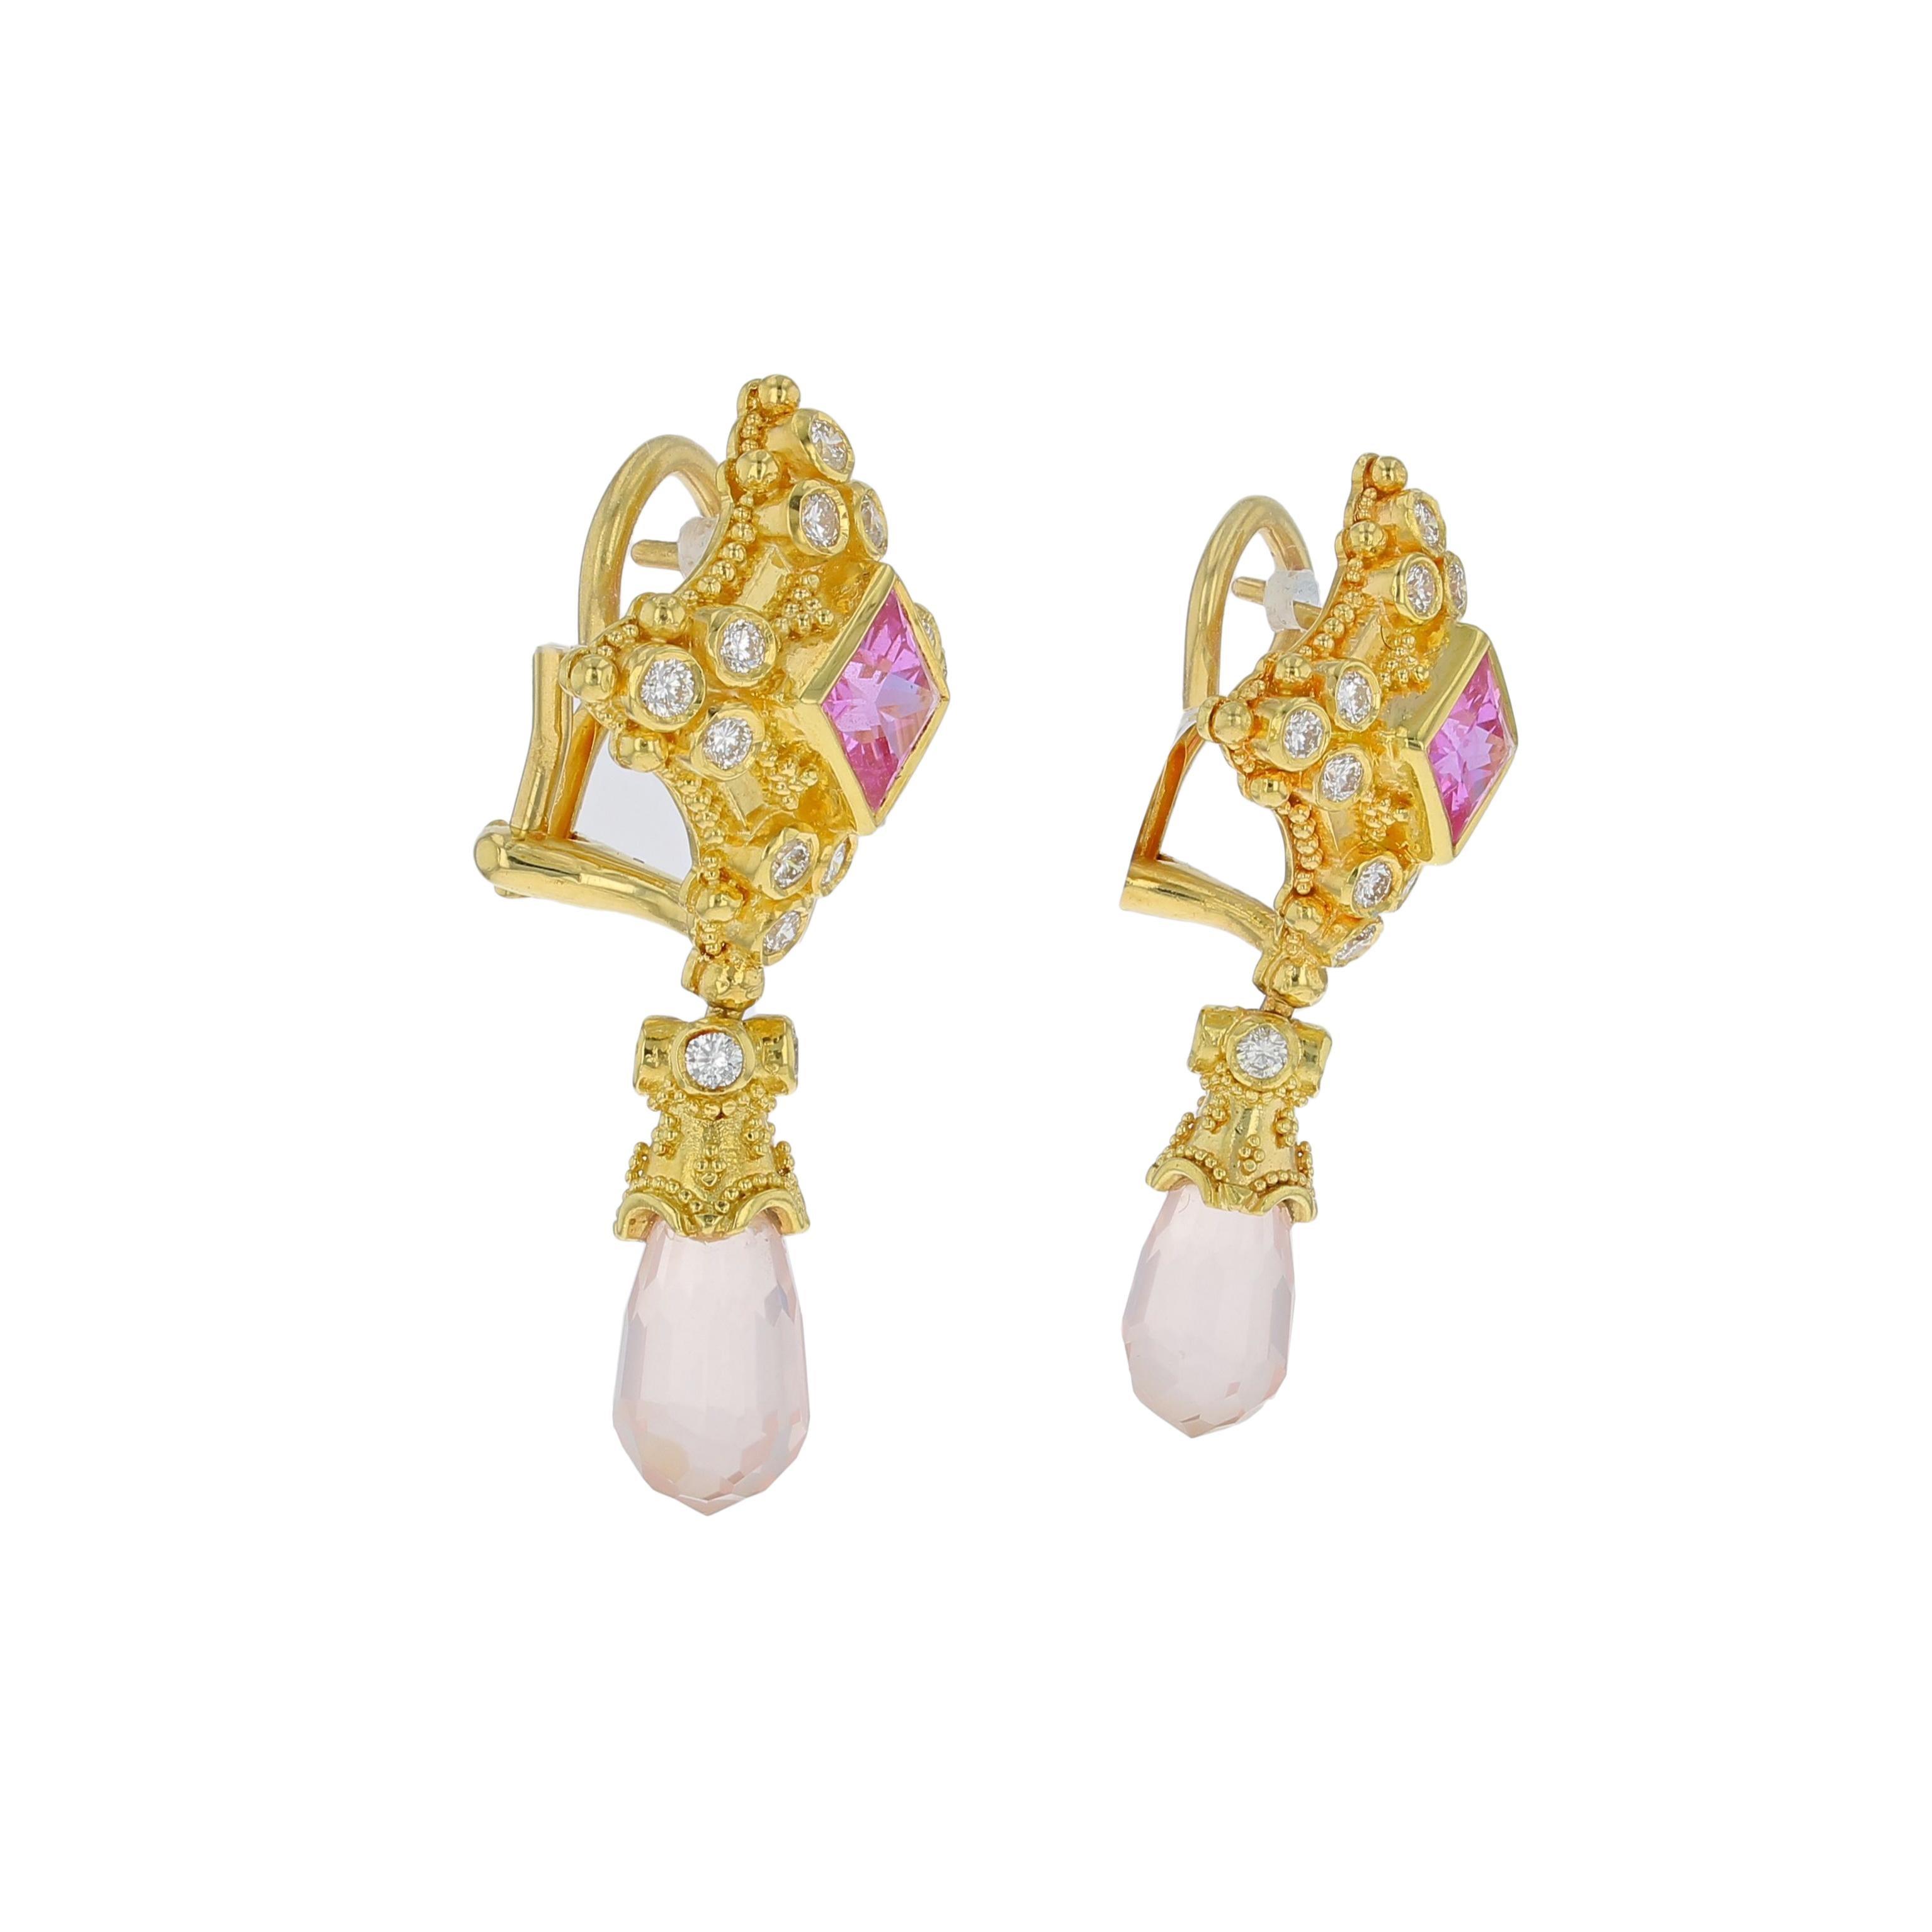 Kent Raible 18 Karat Gold Pink Sapphire, Rose Quartz and Diamond Earrings In New Condition For Sale In Mossrock, WA